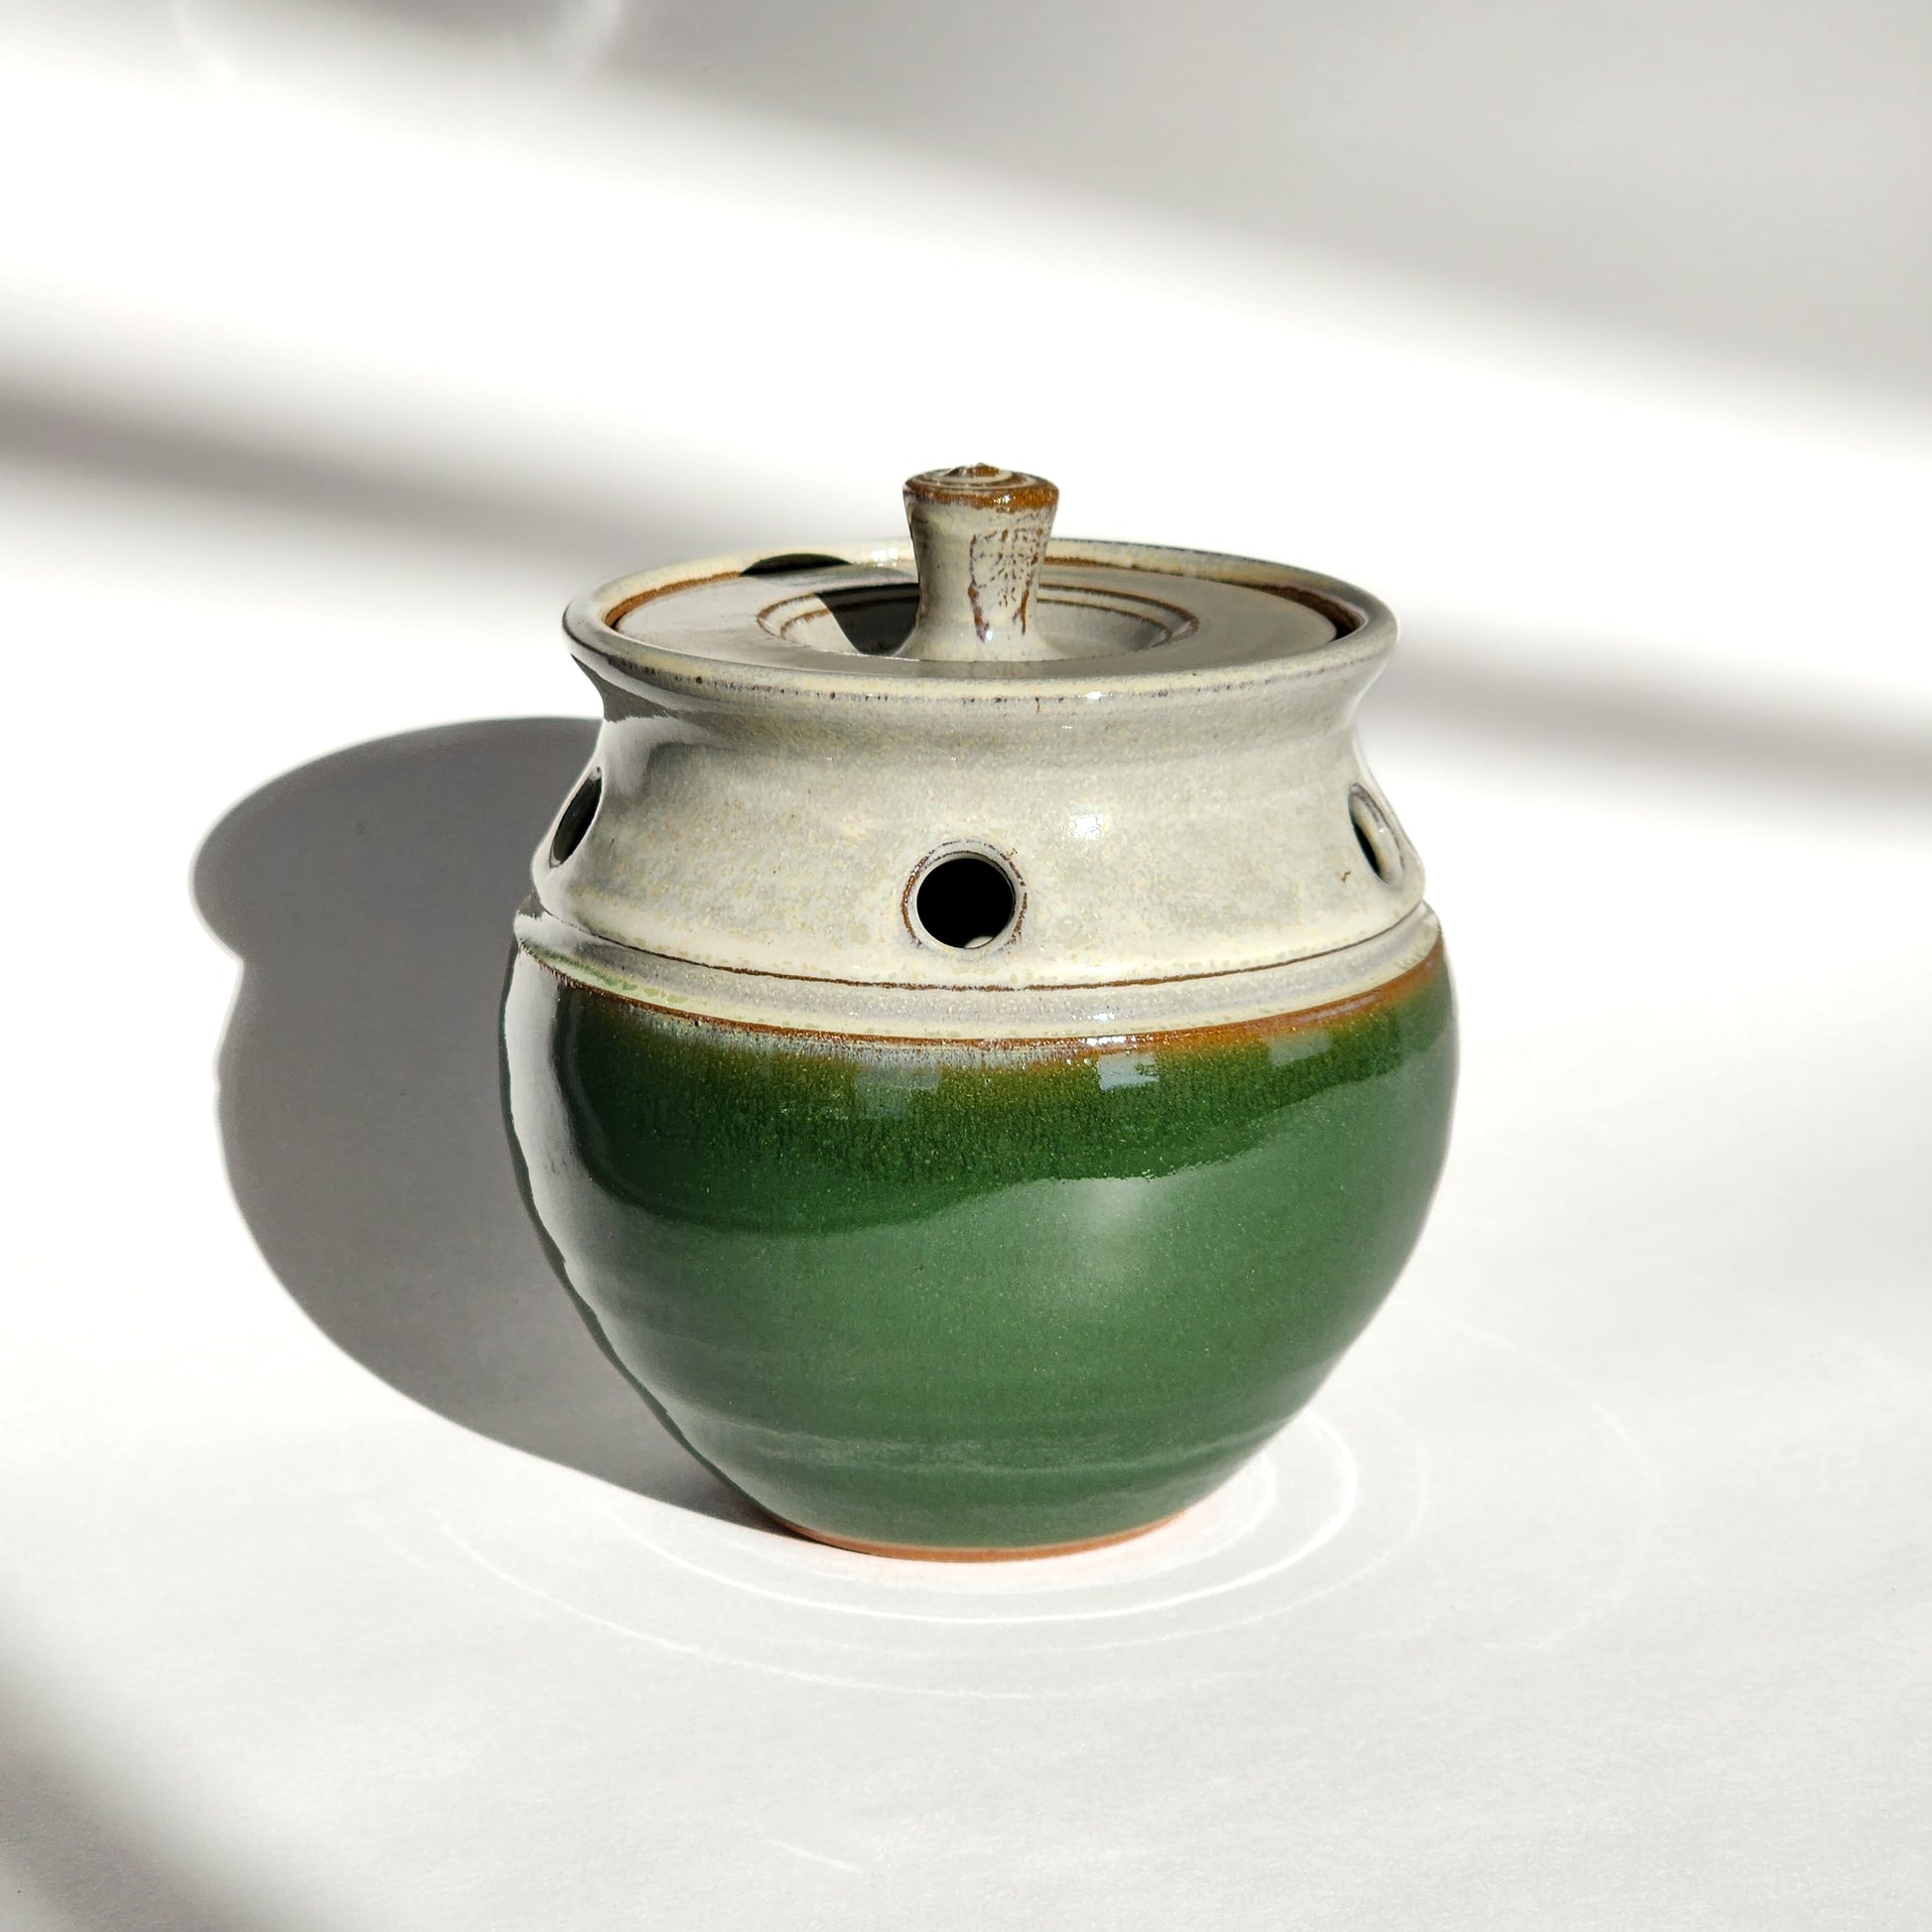 Image: A dark green ceramic garlic keeper, crafted to store garlic bulbs and keep them fresh for longer.